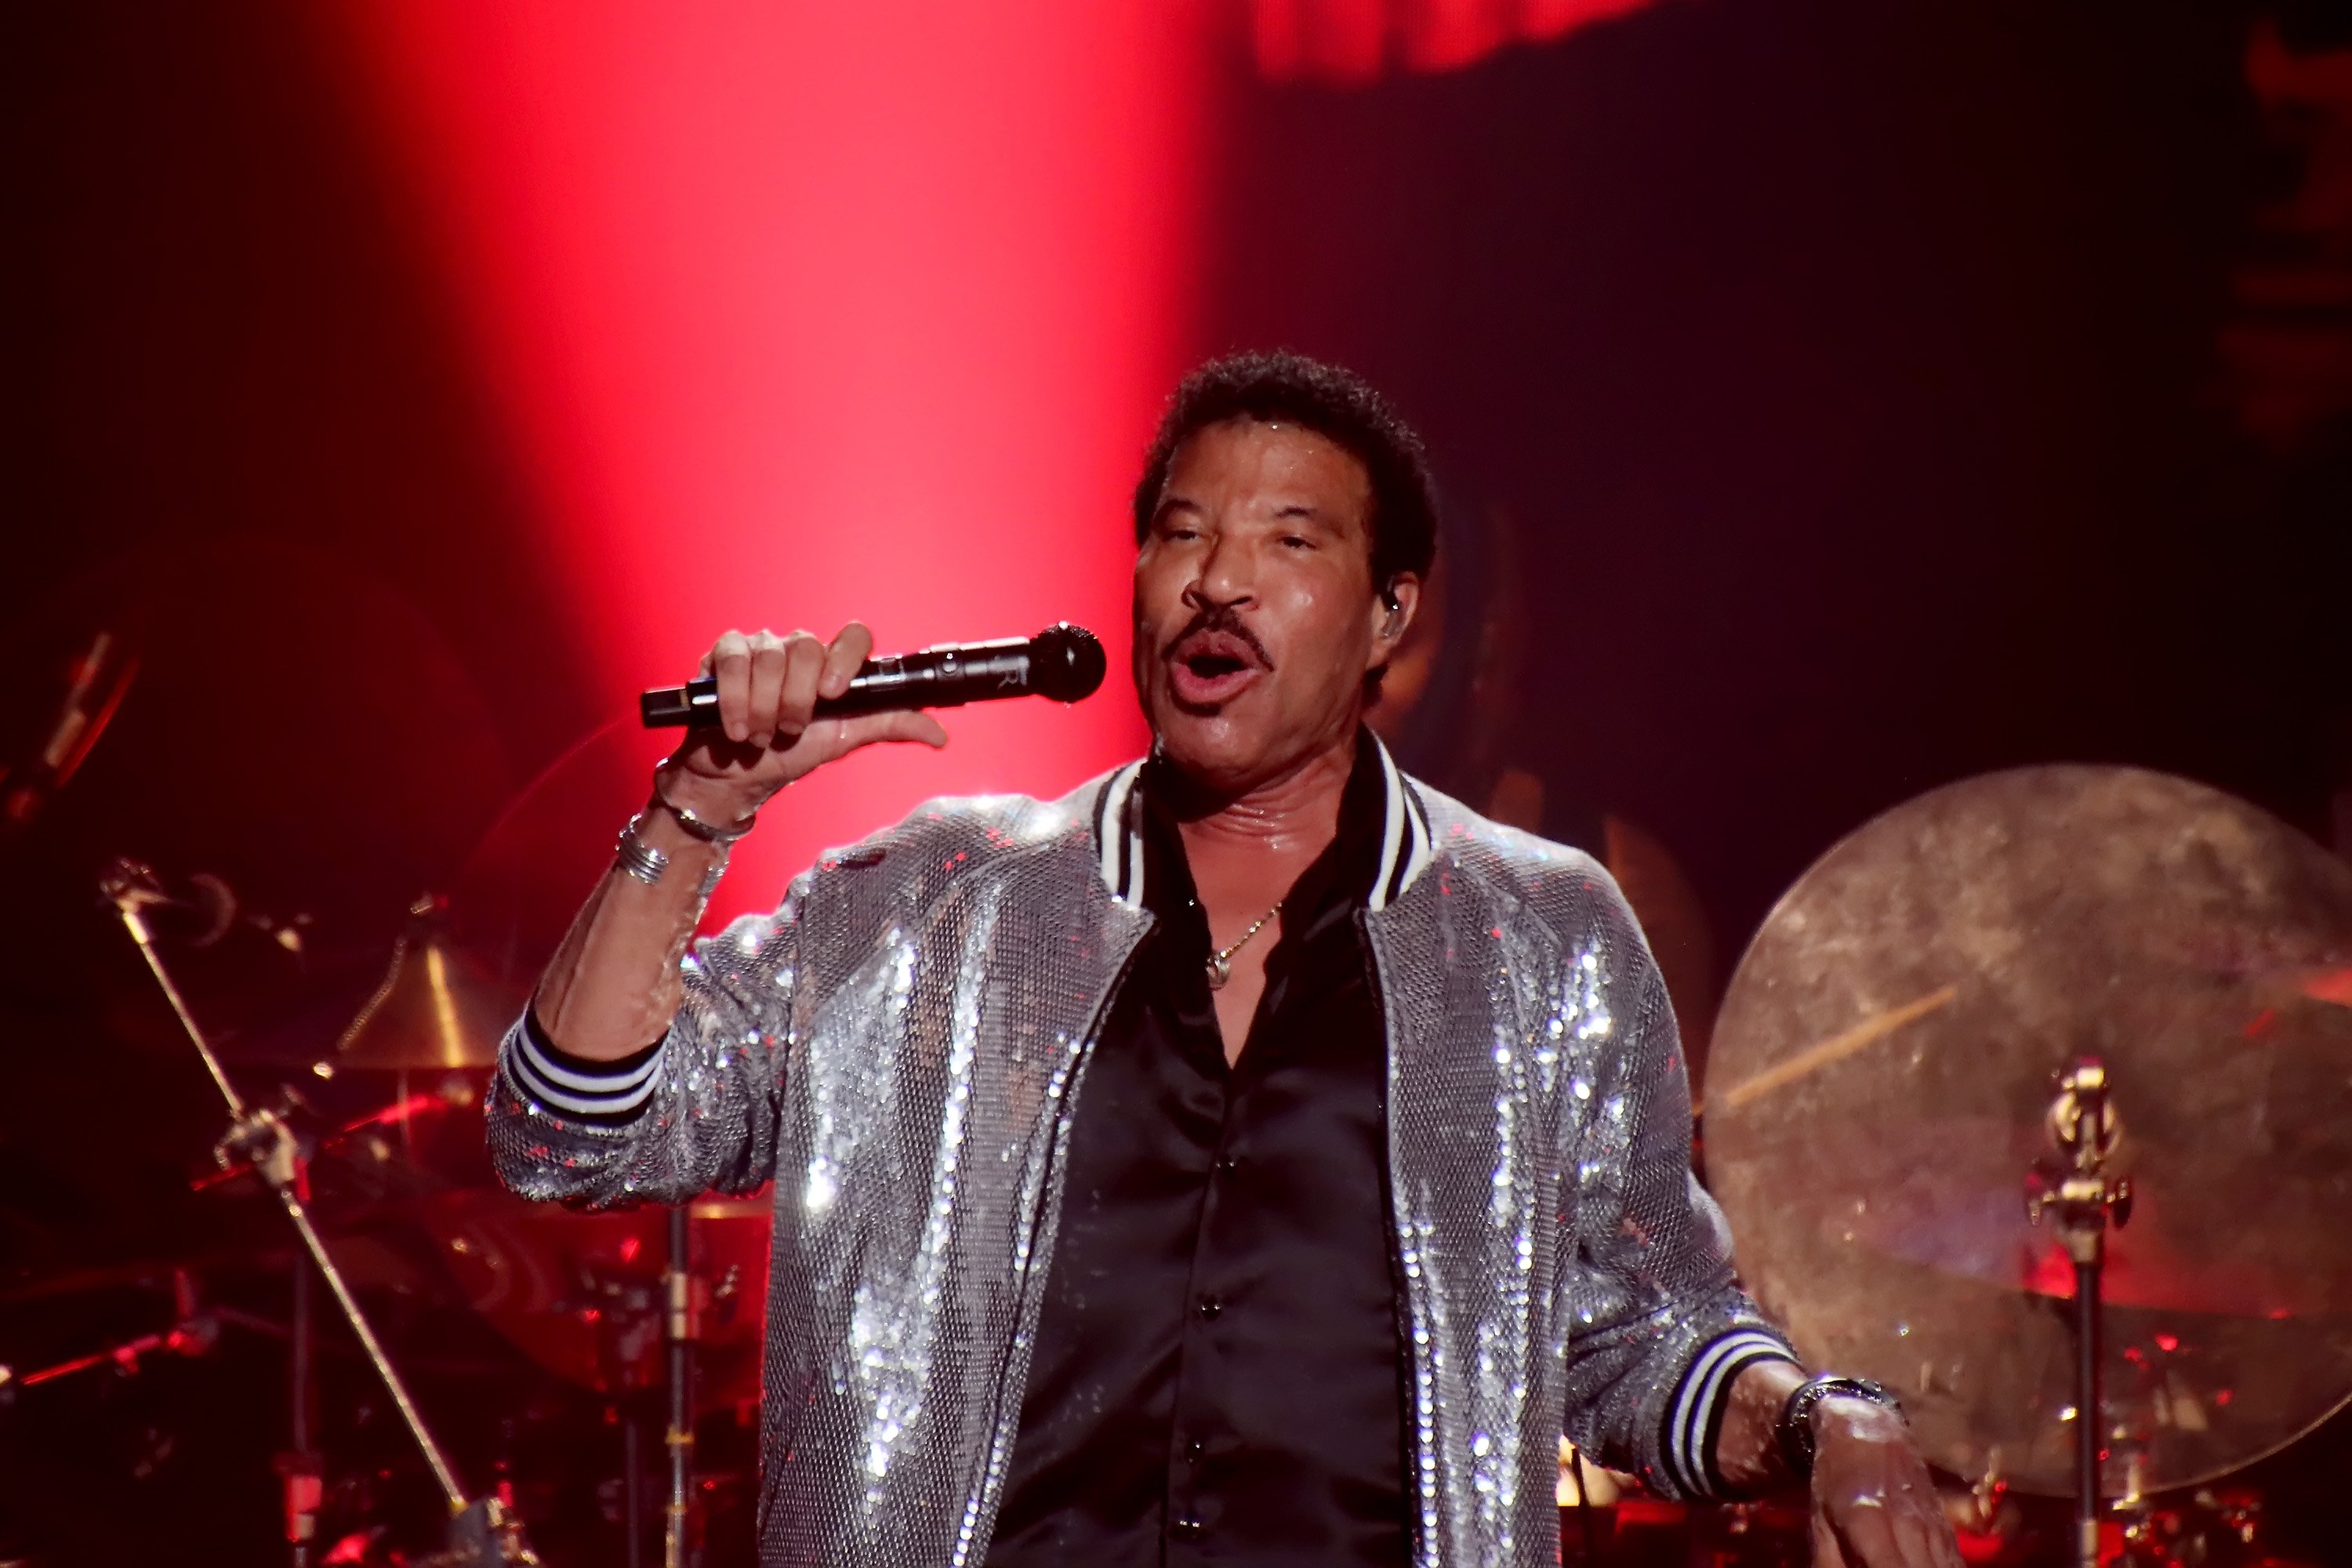 Lionel Richie performs in concert at Etess Arena, Hard Rock Atlantic City on June 24, 2022 in Atlantic City, New Jersey. | Source: Getty Images